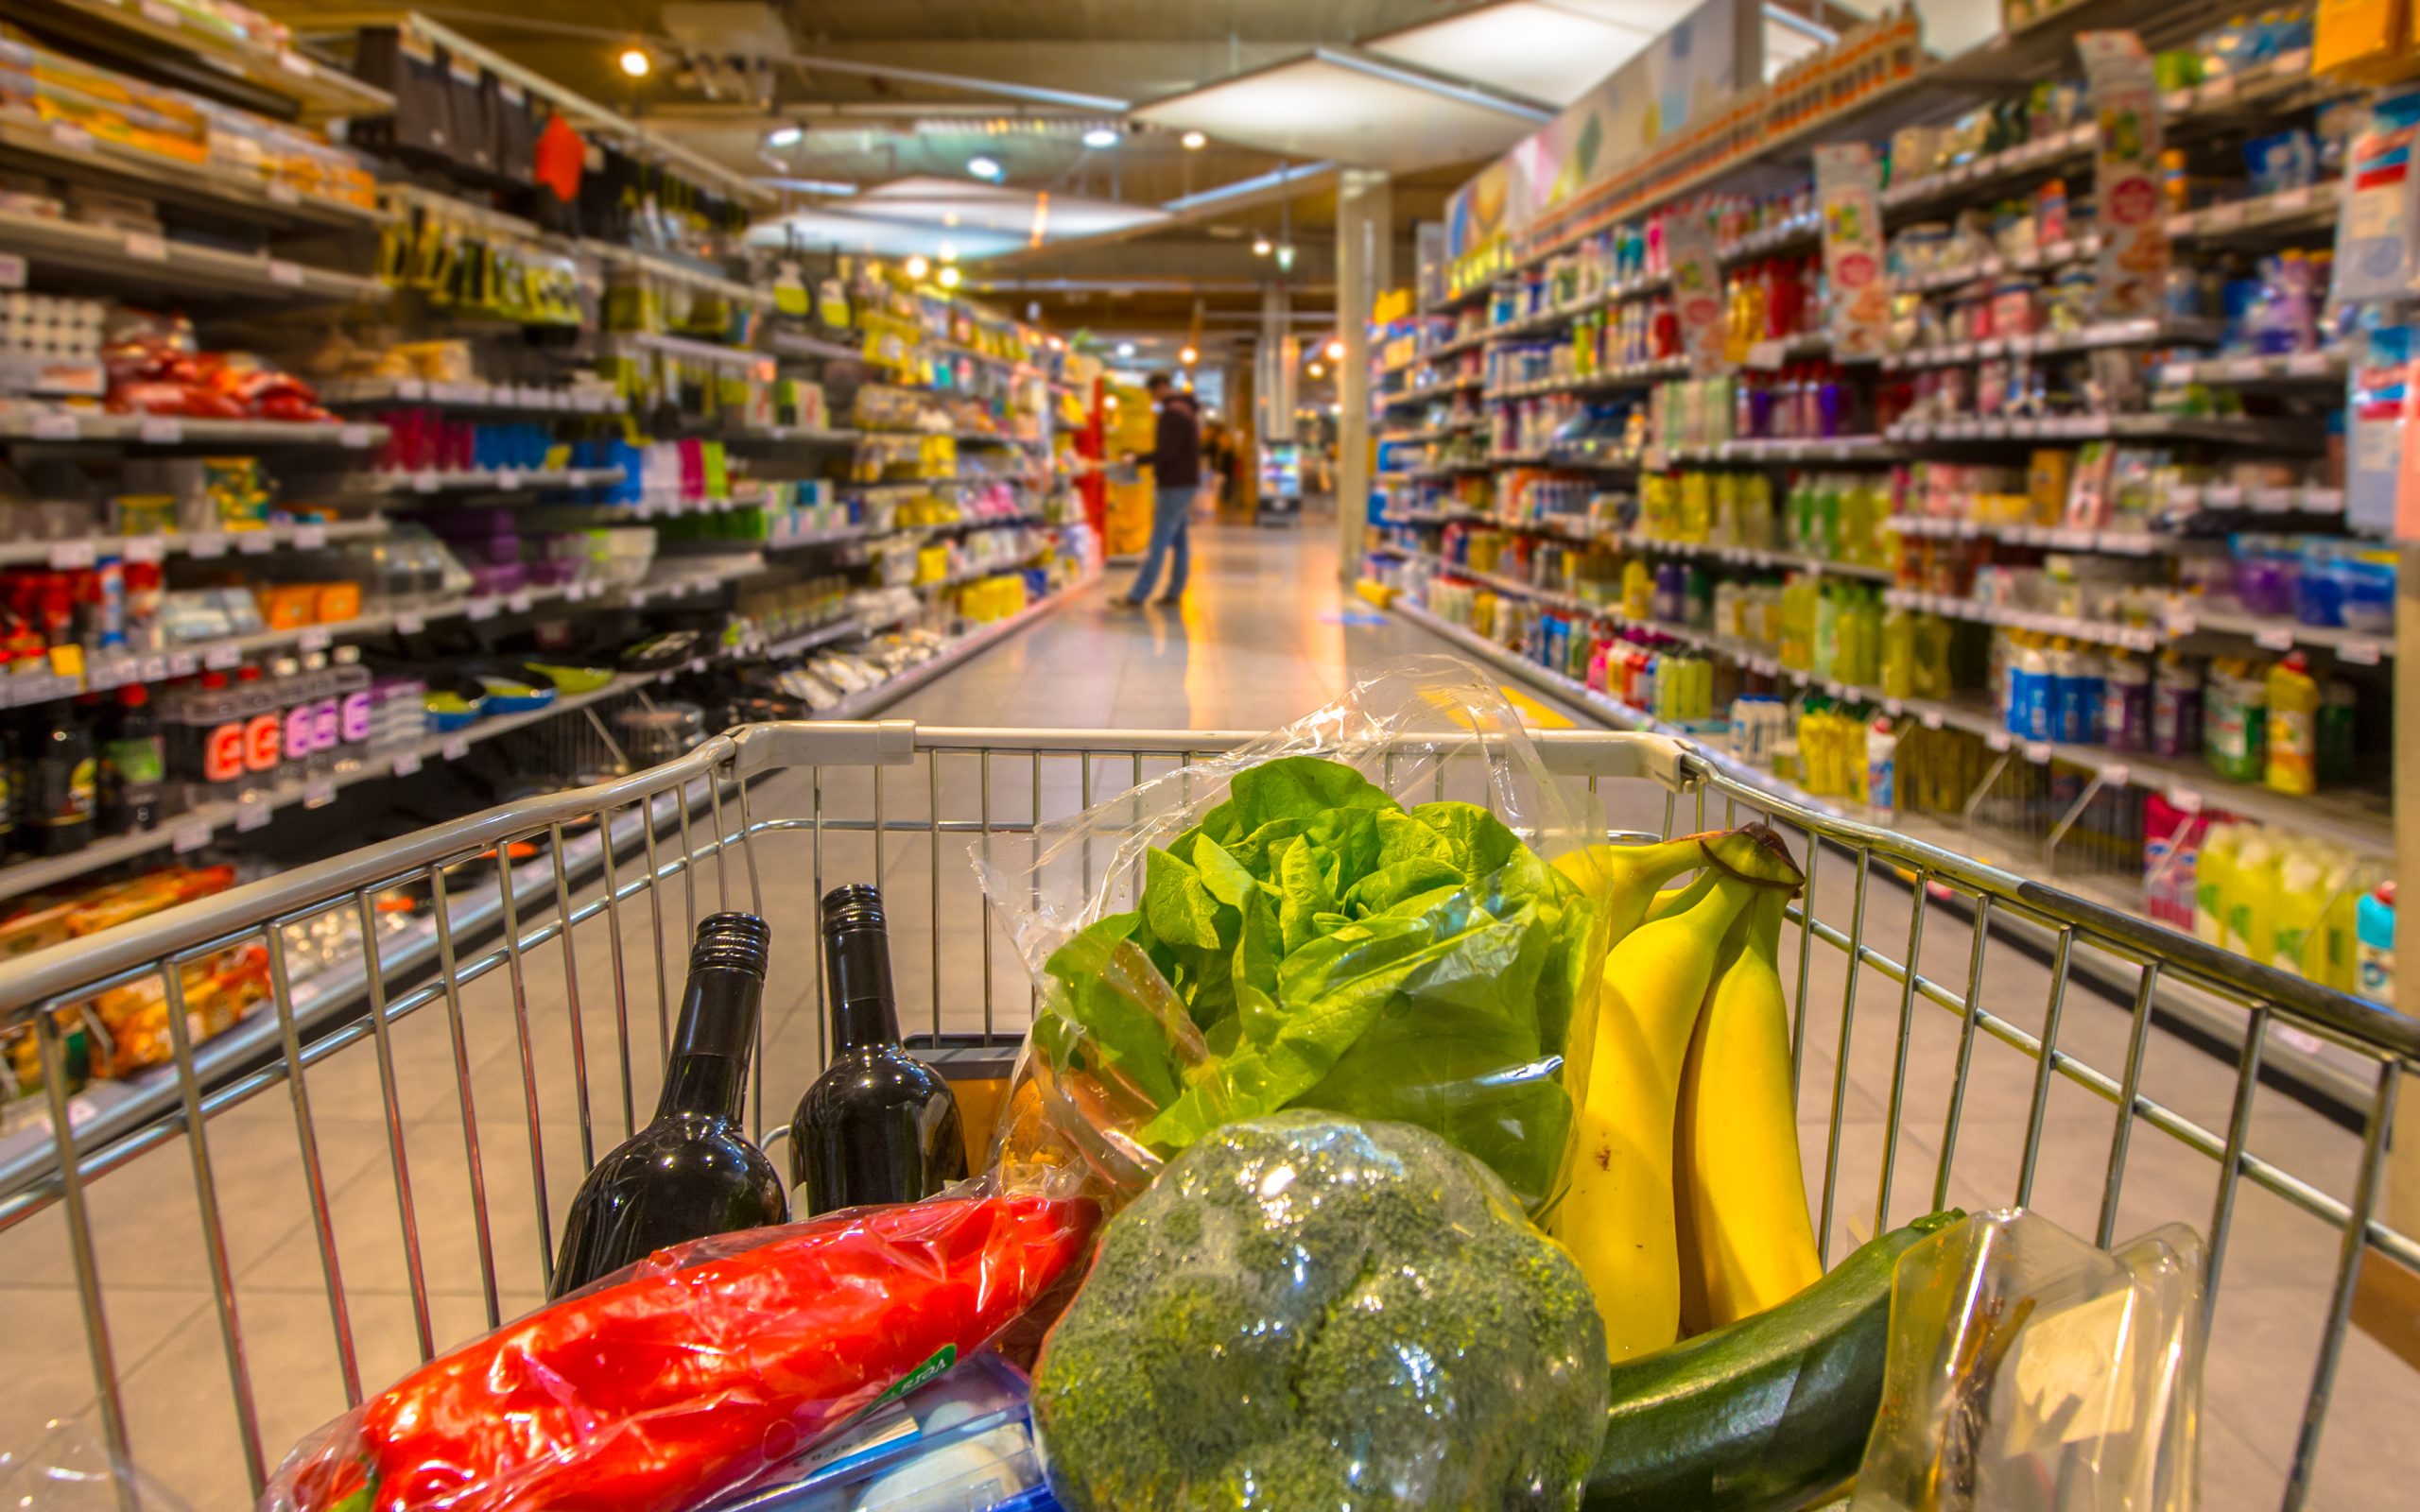 Slowing food inflation aided in large part by retailers – BRC